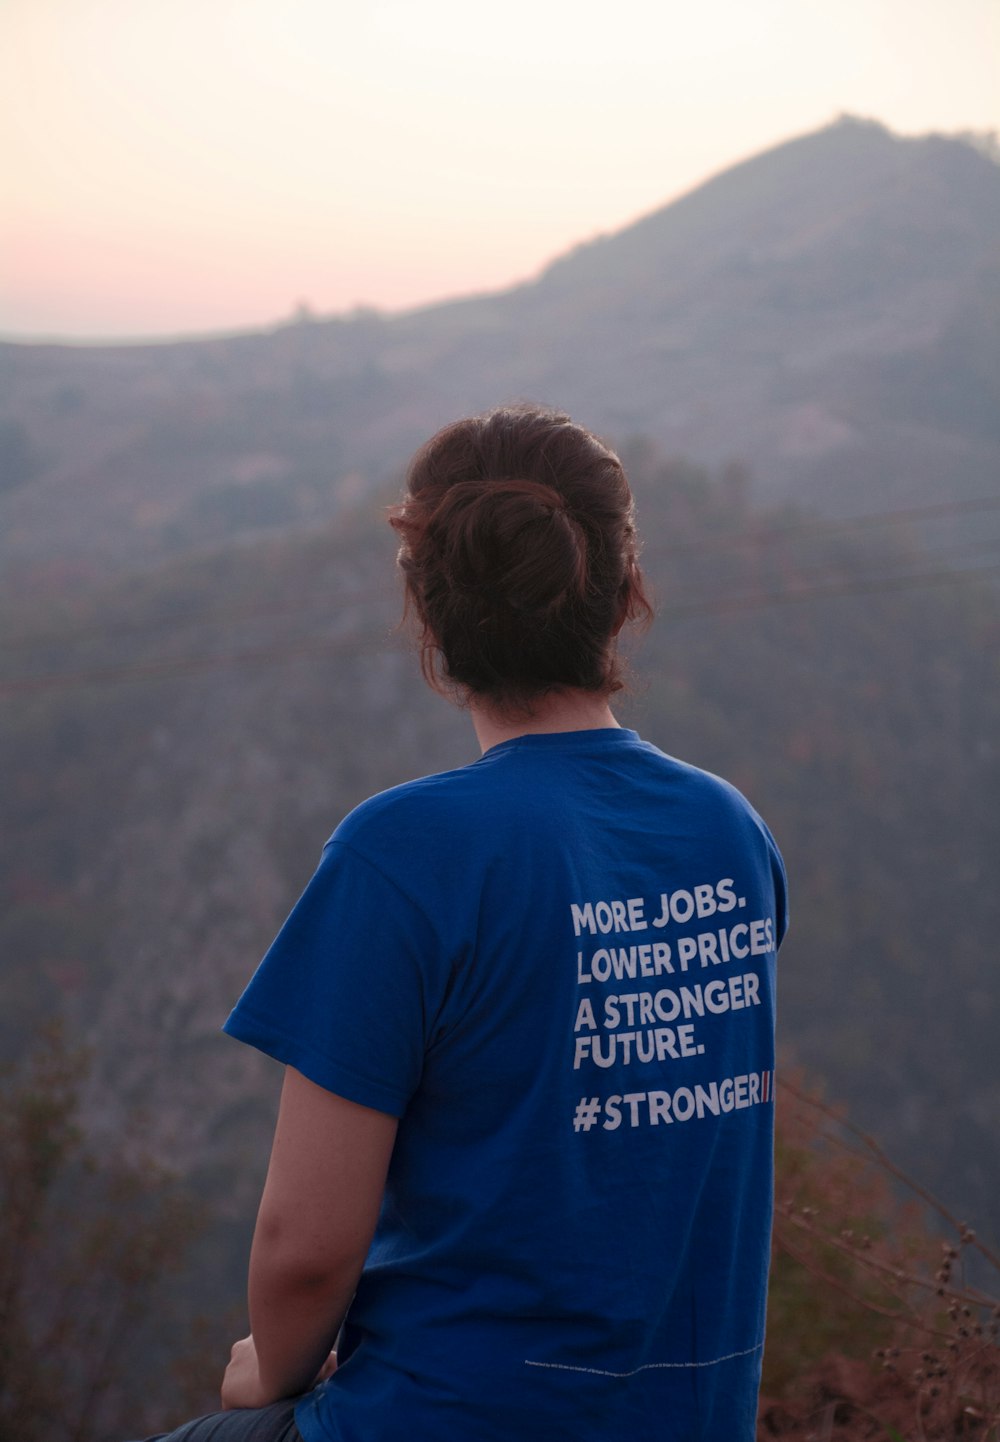 woman in blue crew neck t-shirt standing on cliff during daytime